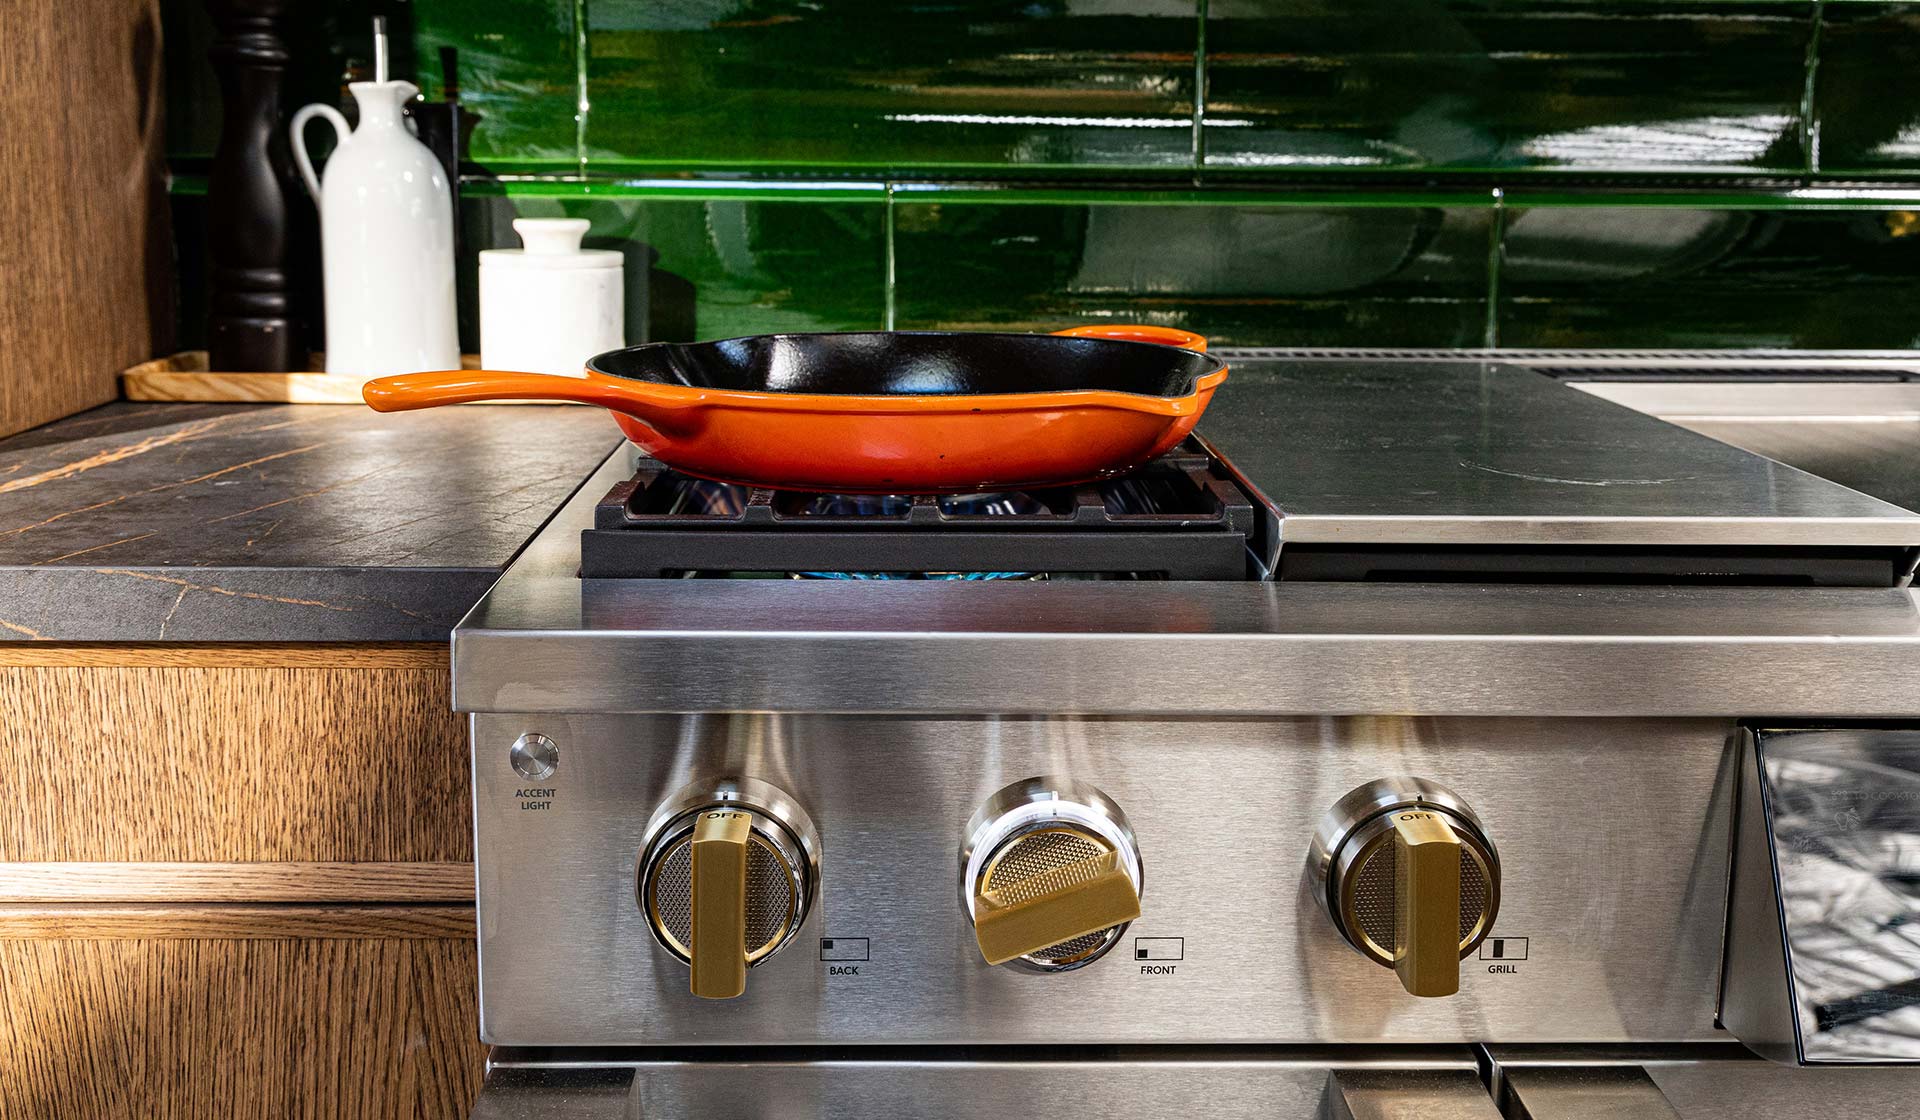 Professional range with green tile and orange pan